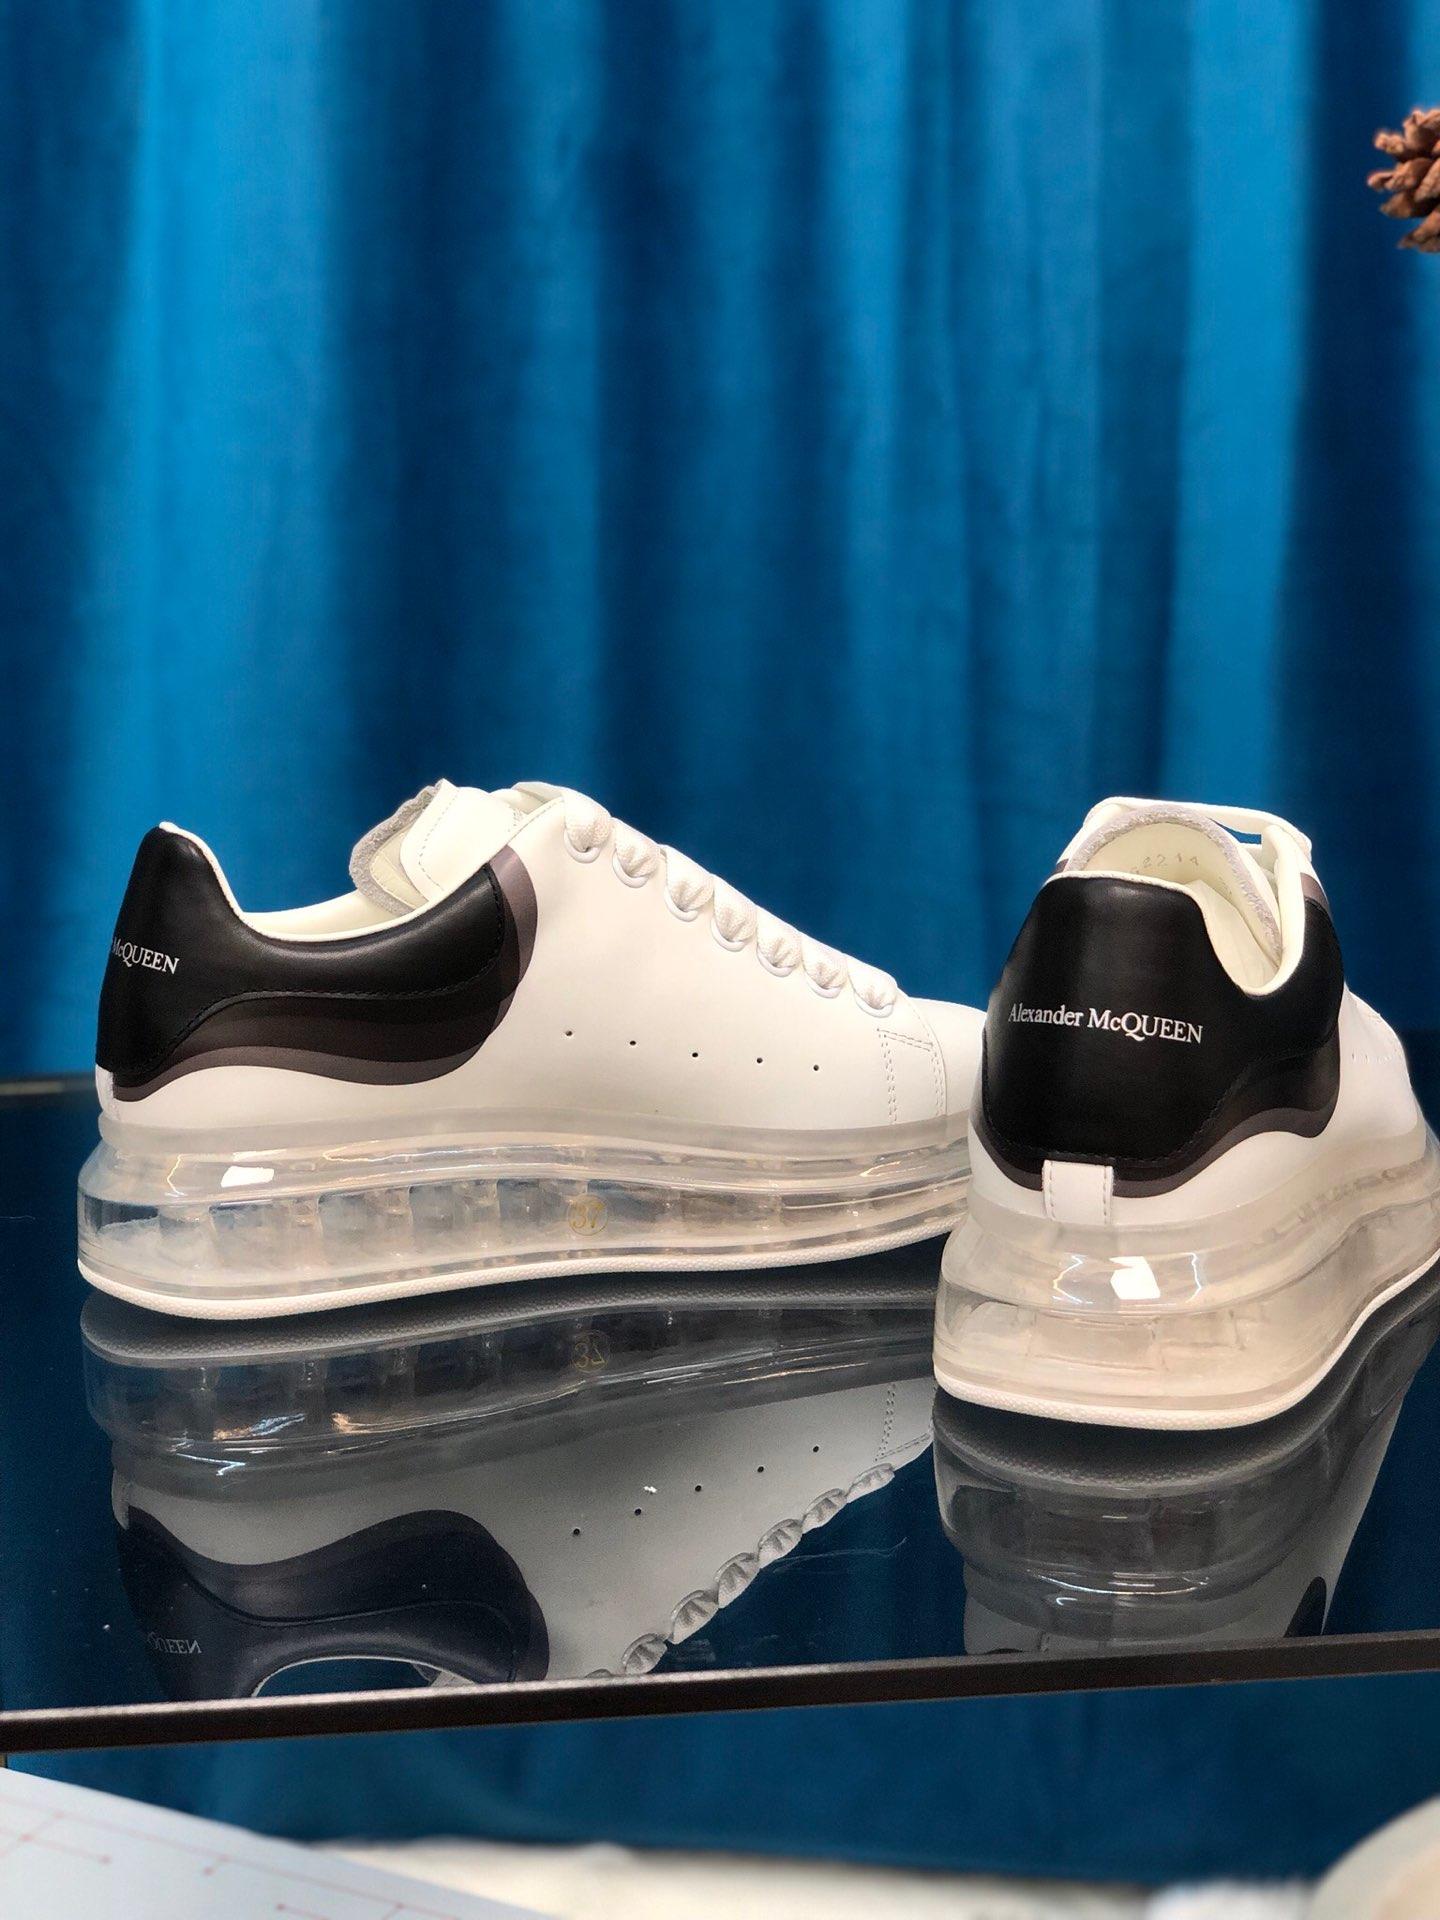 Alexander McQueen Fahion Sneaker White and black heel with transparent sole MS100025